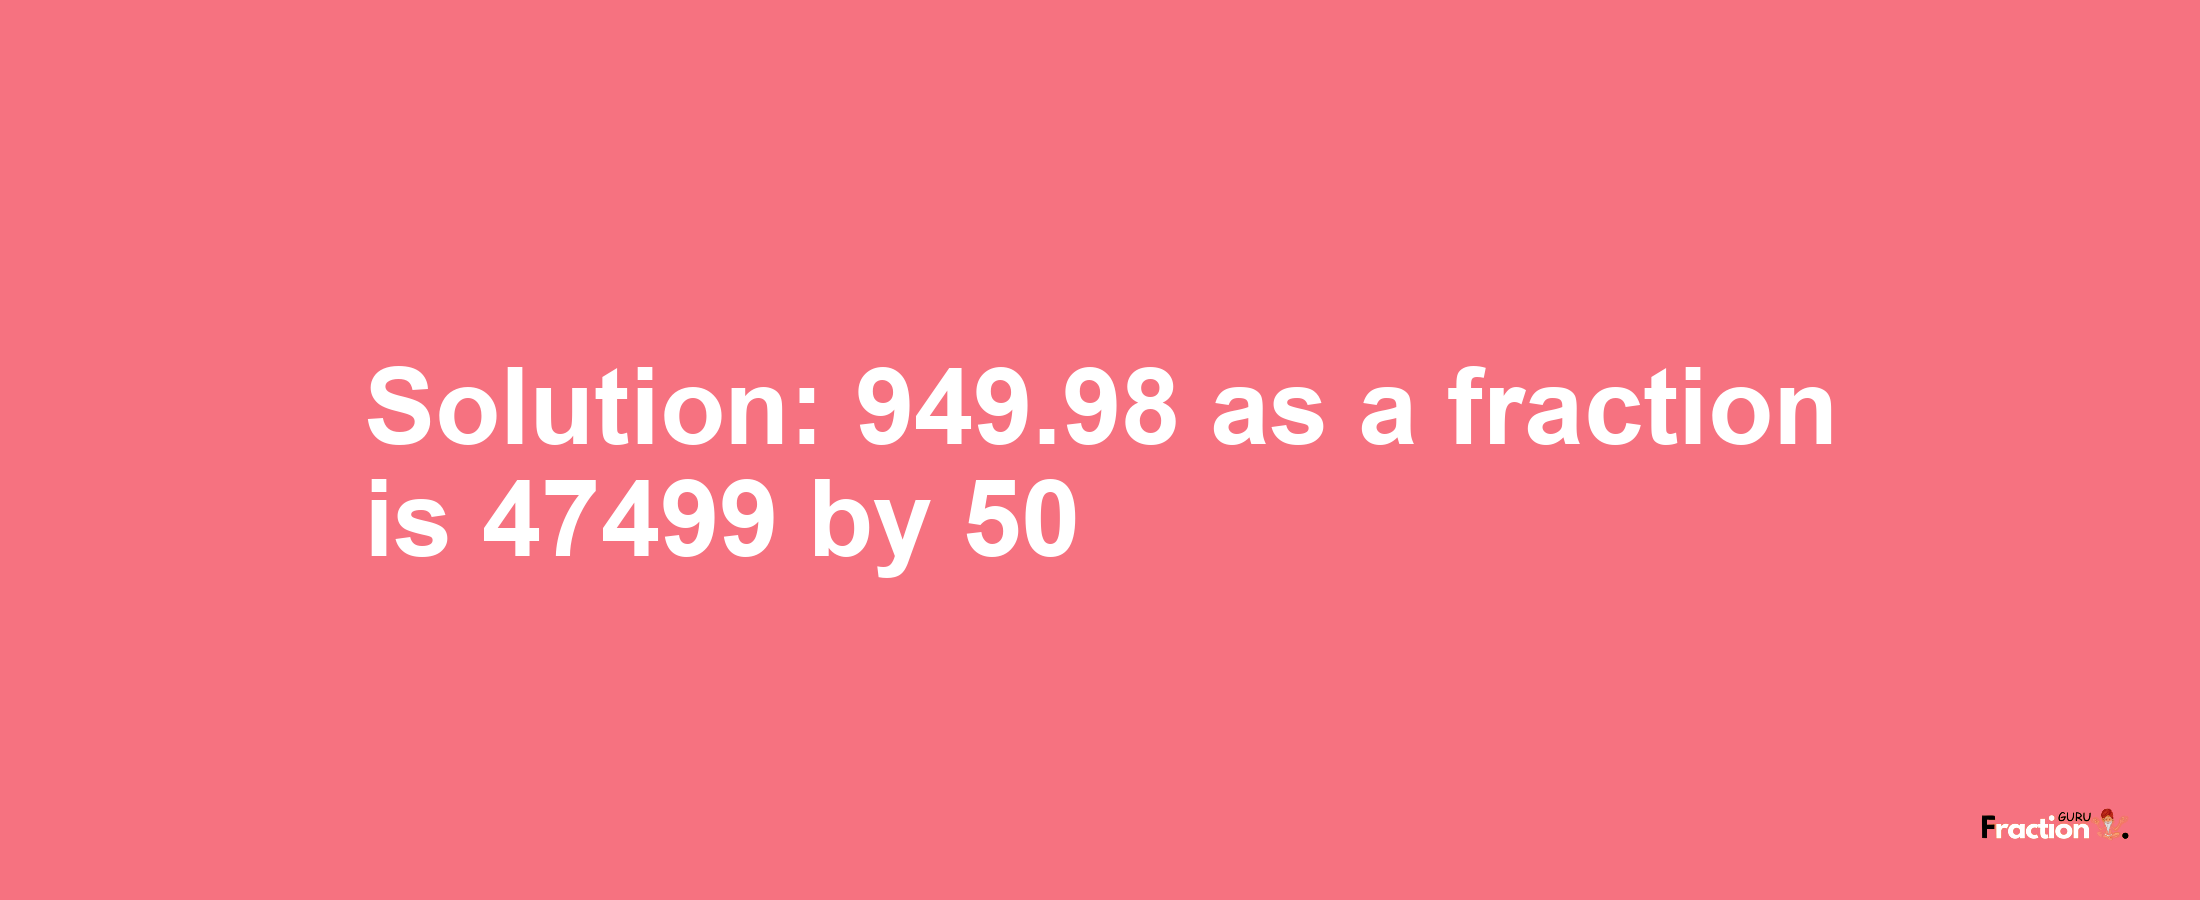 Solution:949.98 as a fraction is 47499/50